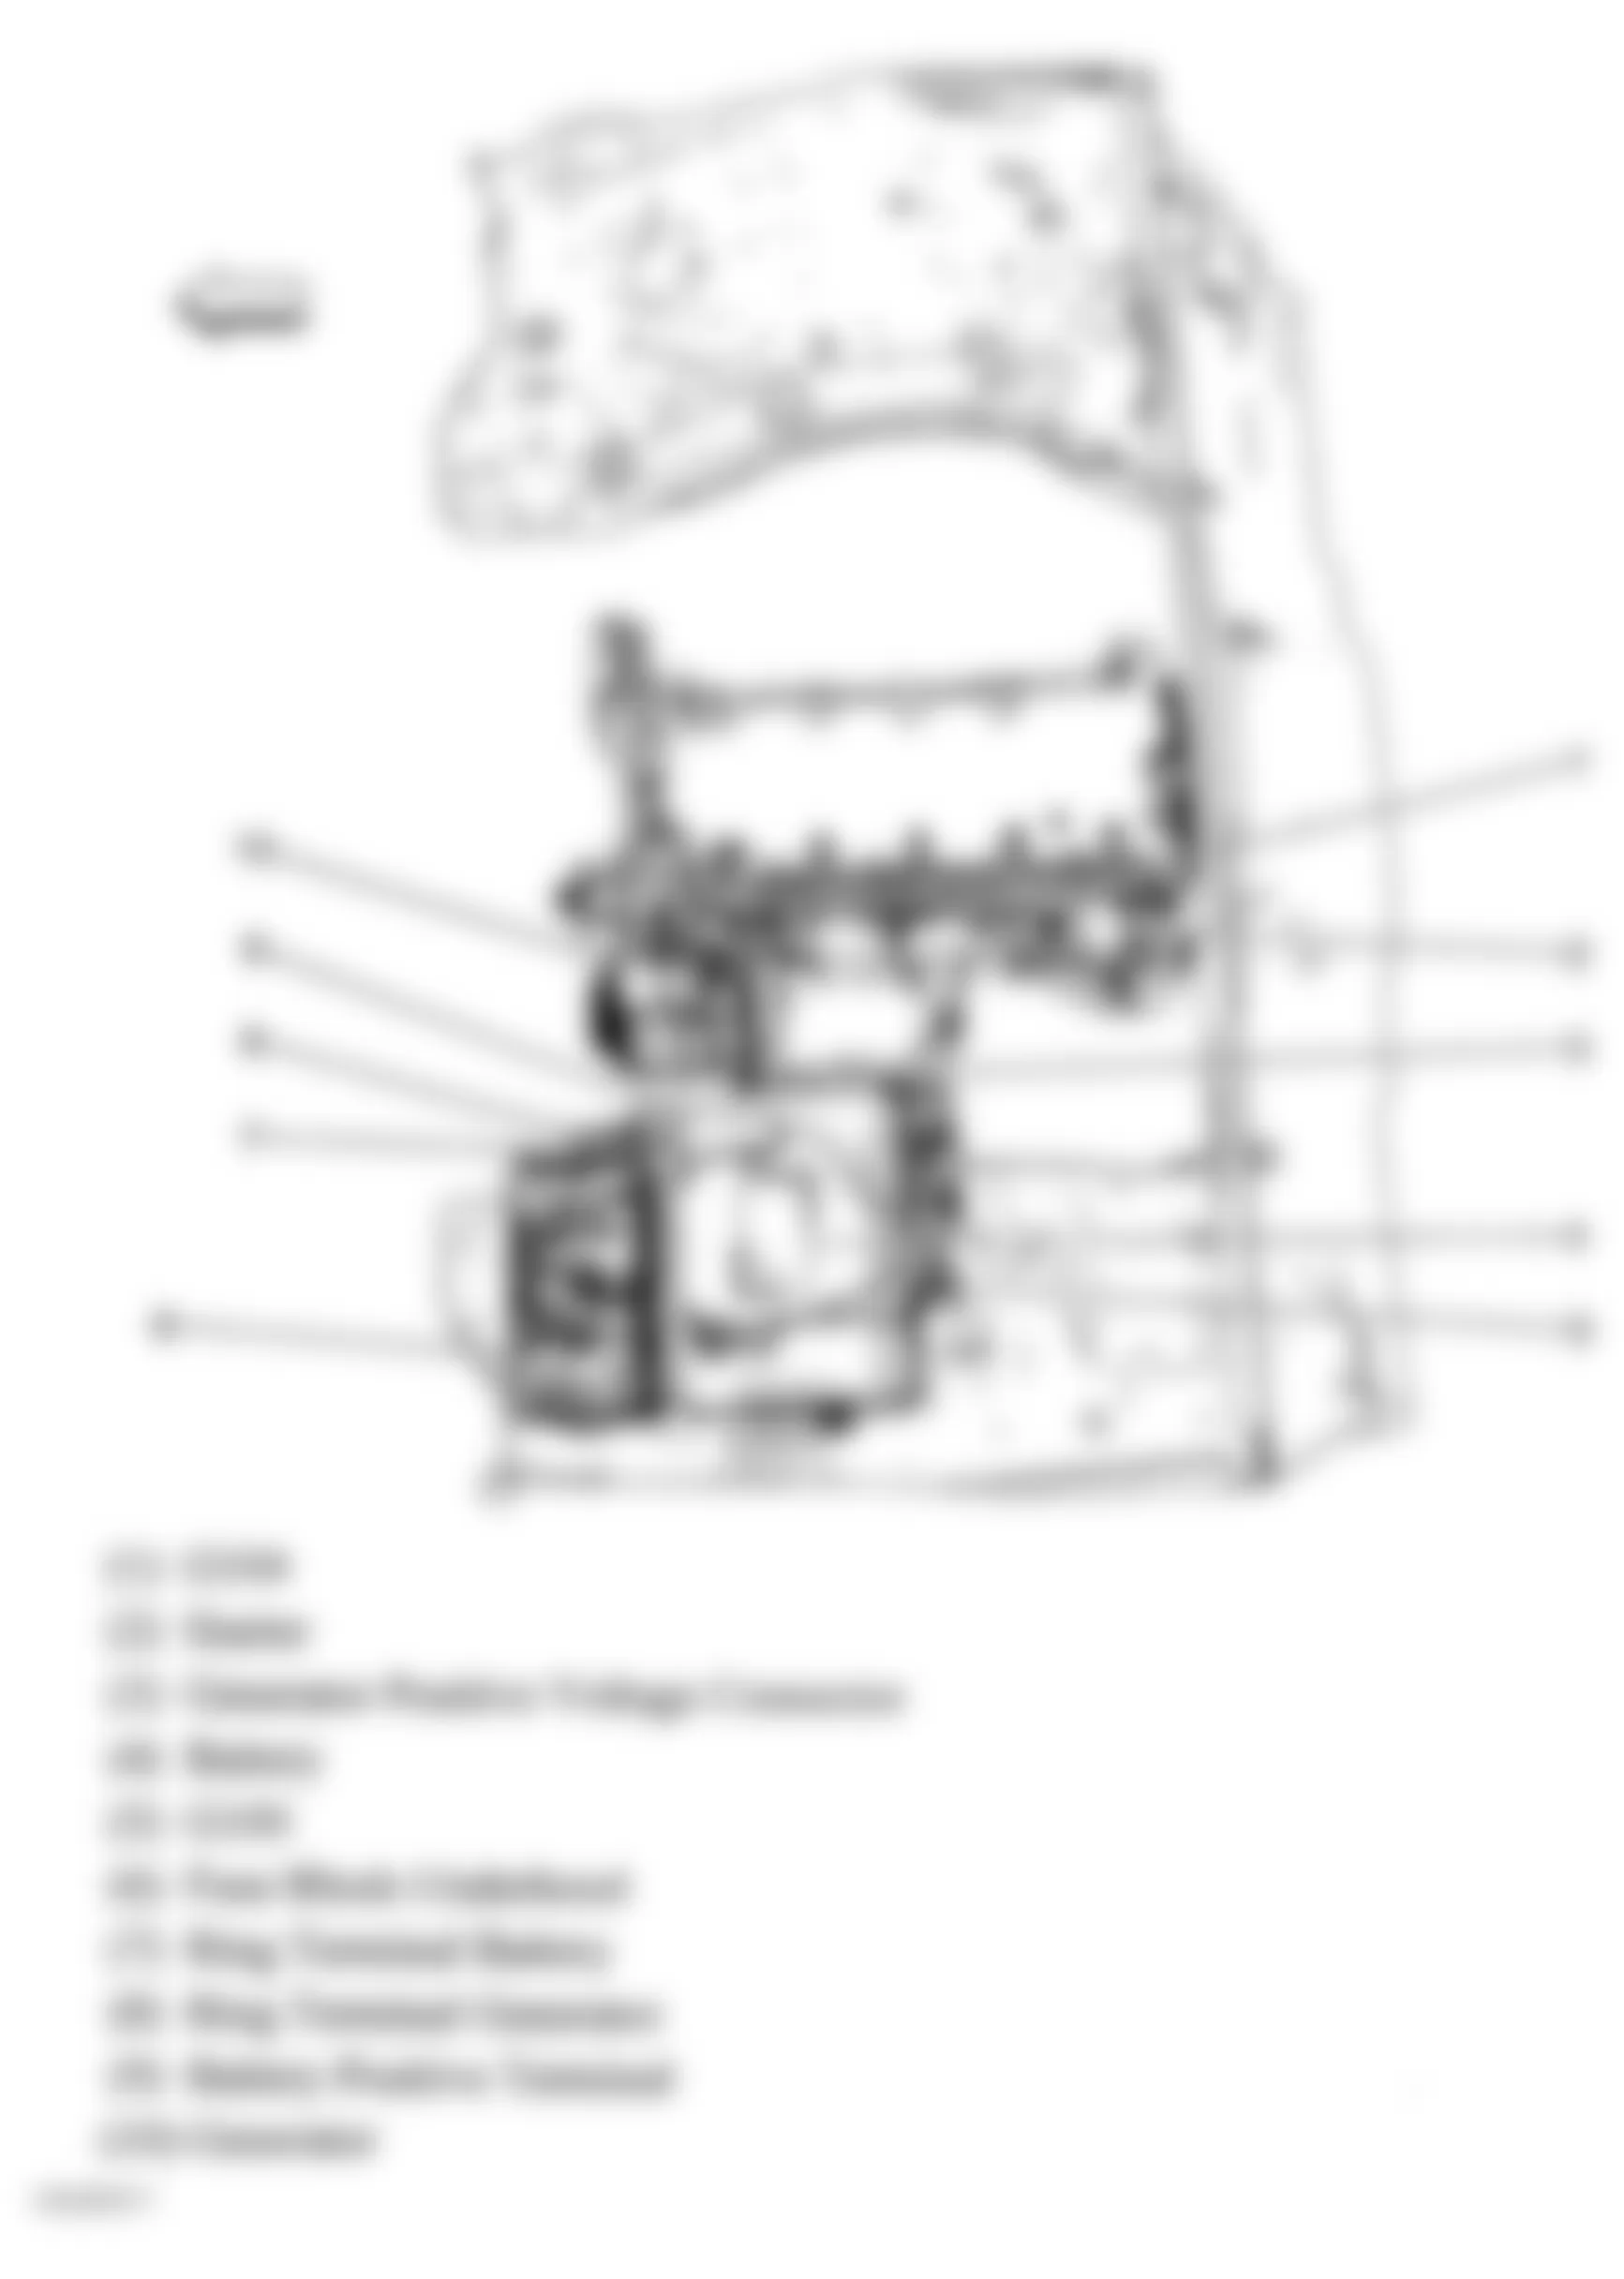 GMC Canyon 2005 - Component Locations -  Engine Compartment (Top View)